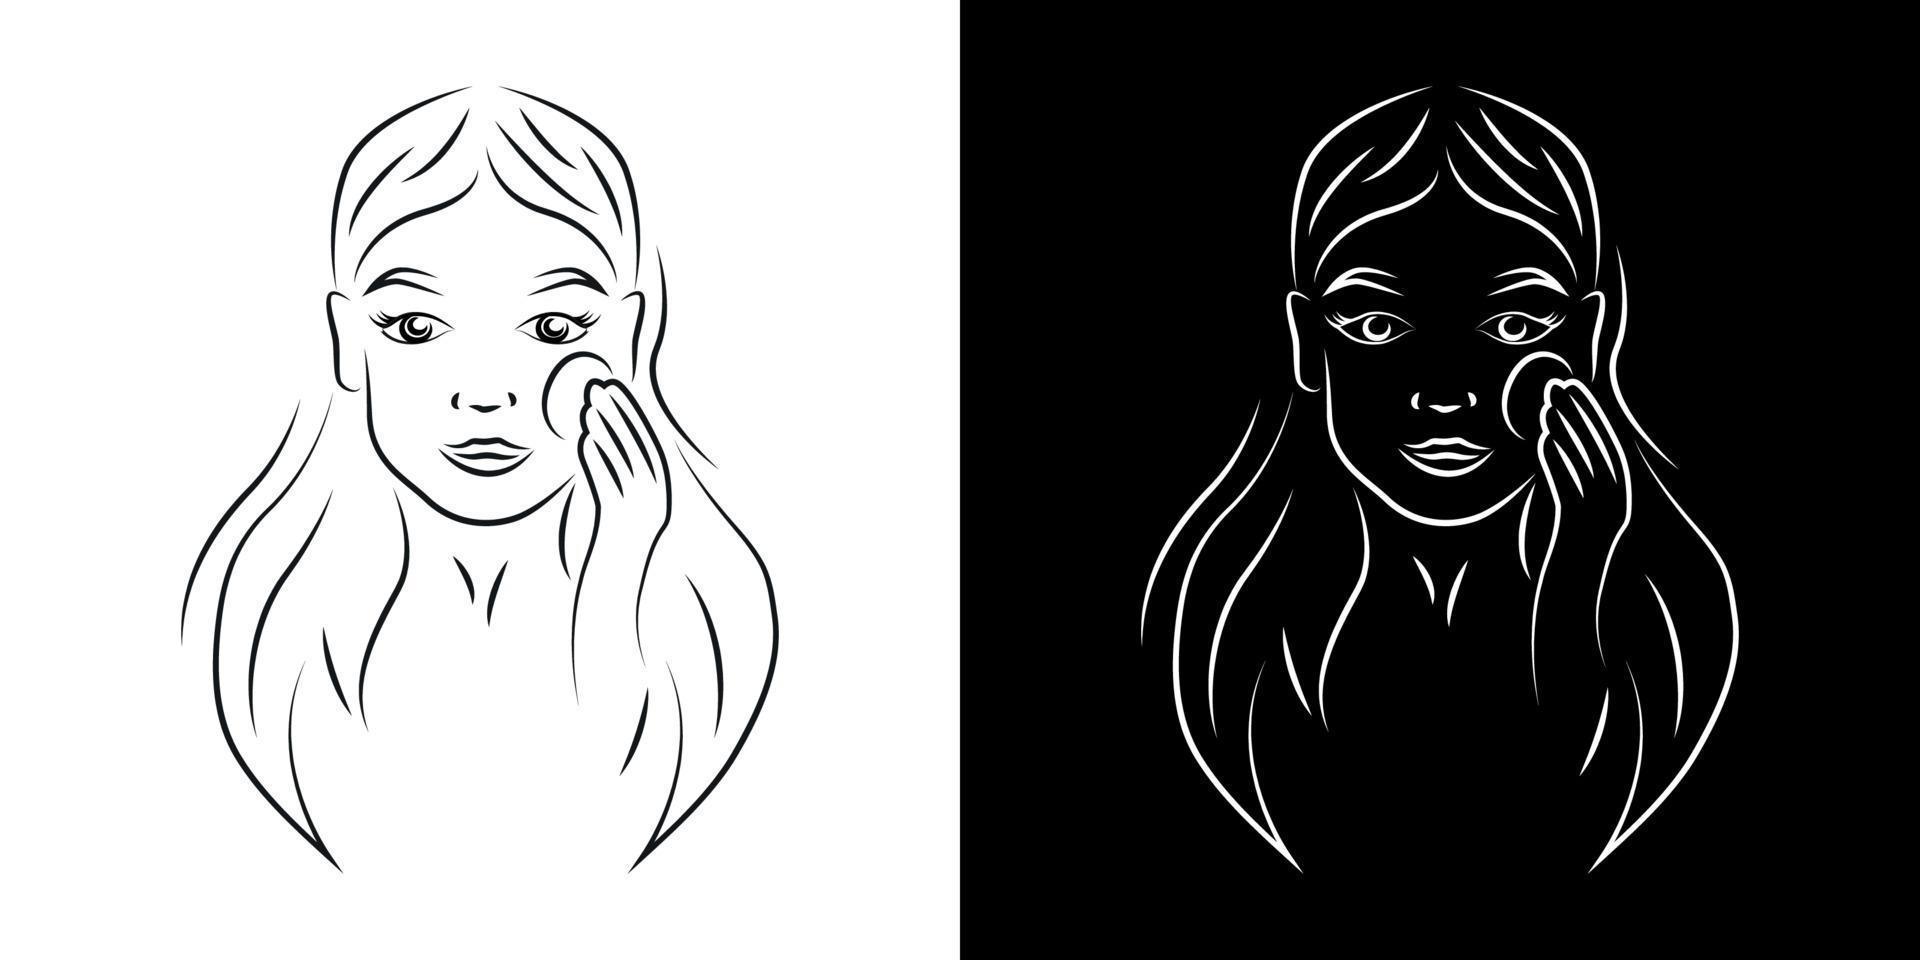 Woman removing make up contour portrait vector illustration. Girl face with smiling expression realistic line art. Lady with cotton pad outline character on black and white backgrounds